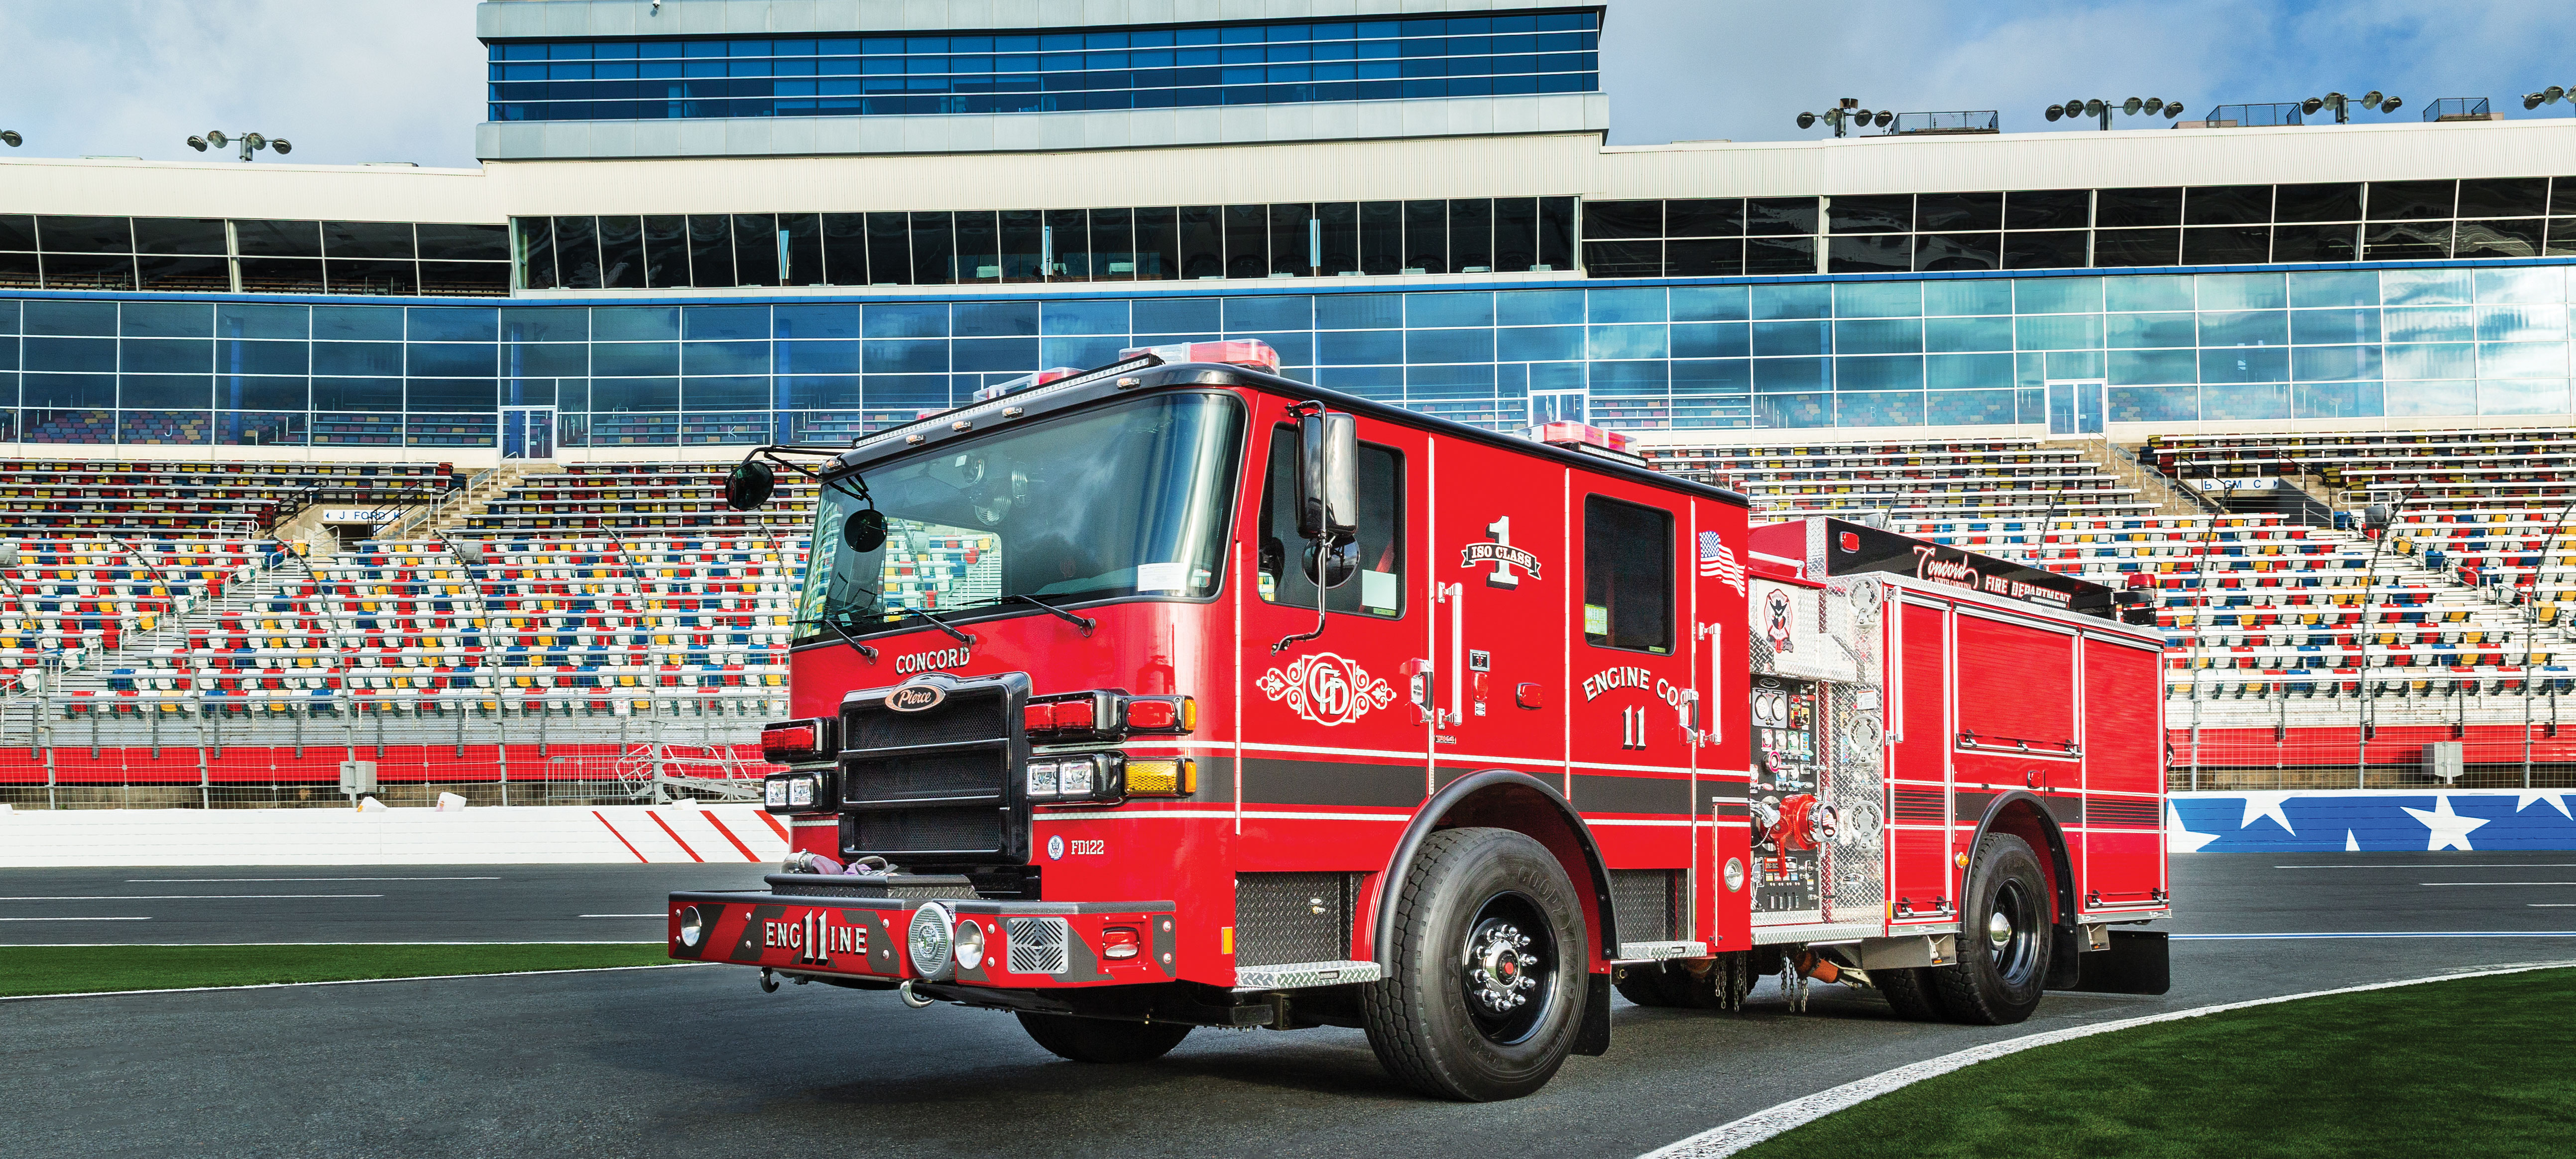 September 2021 Featured Truck of the Month Enforcer Customer Fire Truck Chassis Pumper